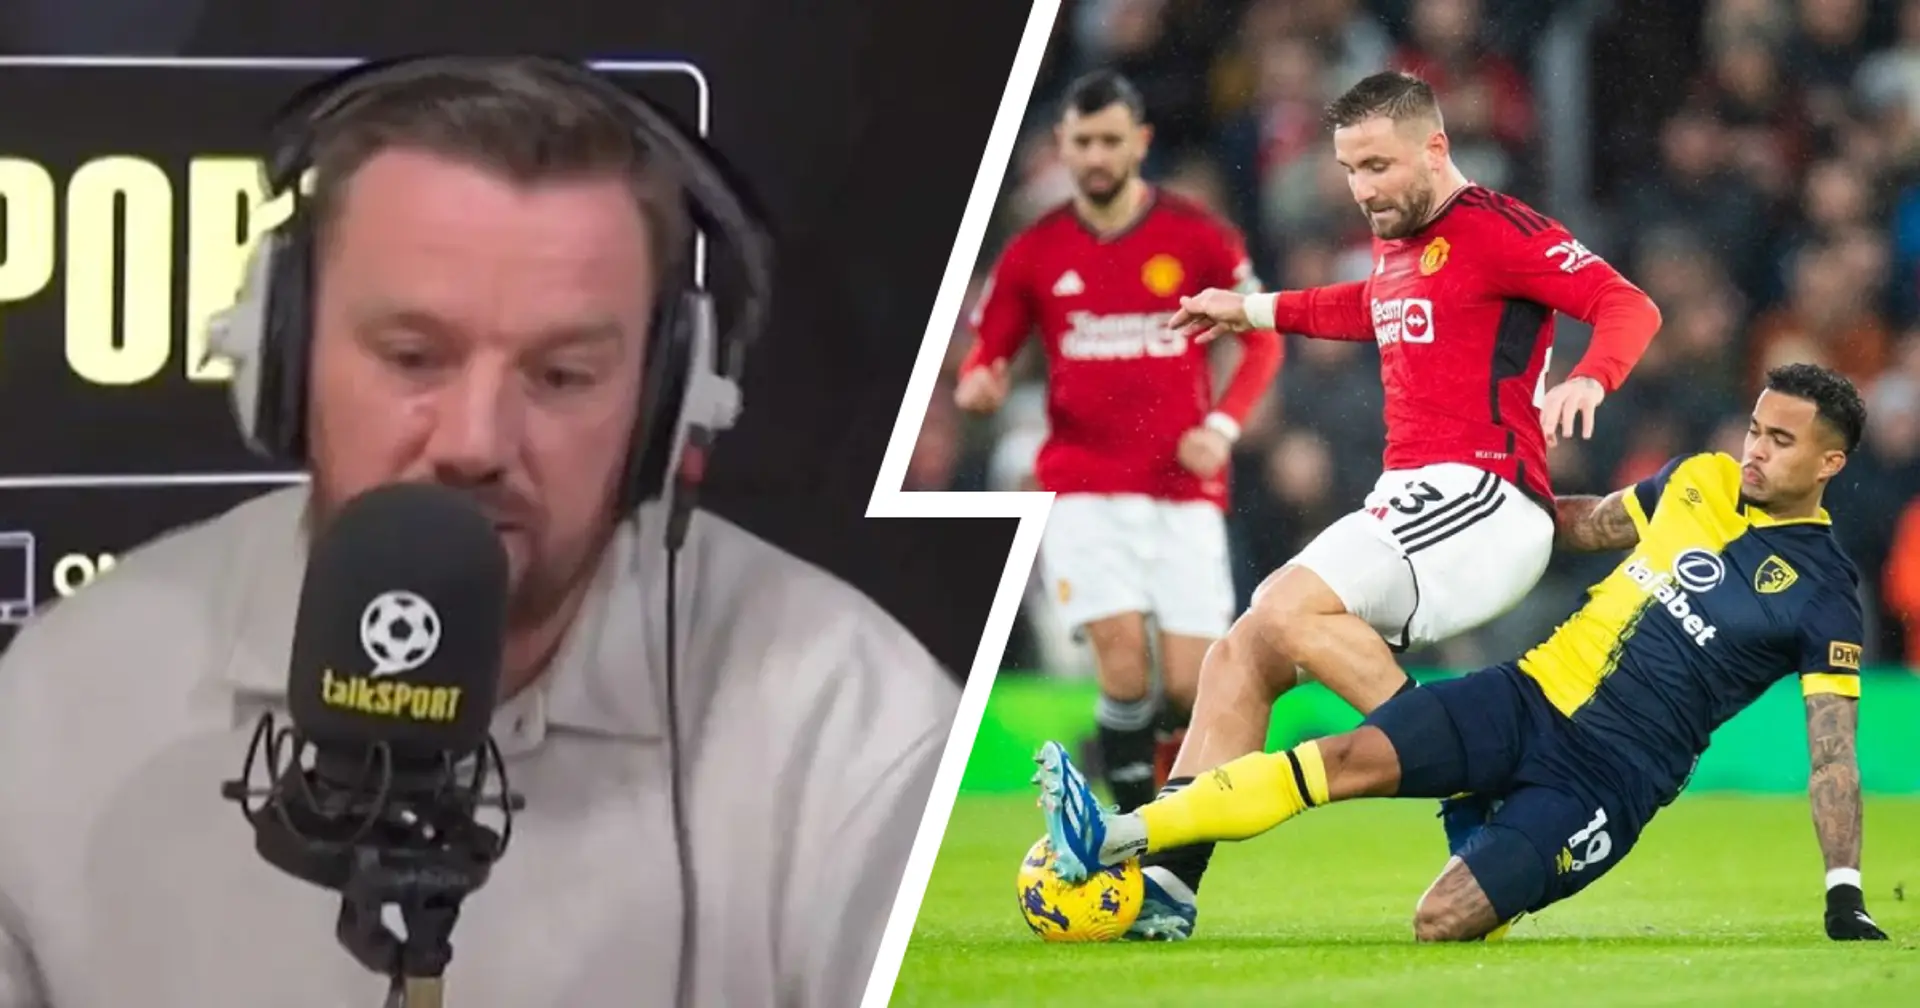 'The players were a disgrace to wear that shirt': Jamie O'Hara goes ballistic on Man United stars